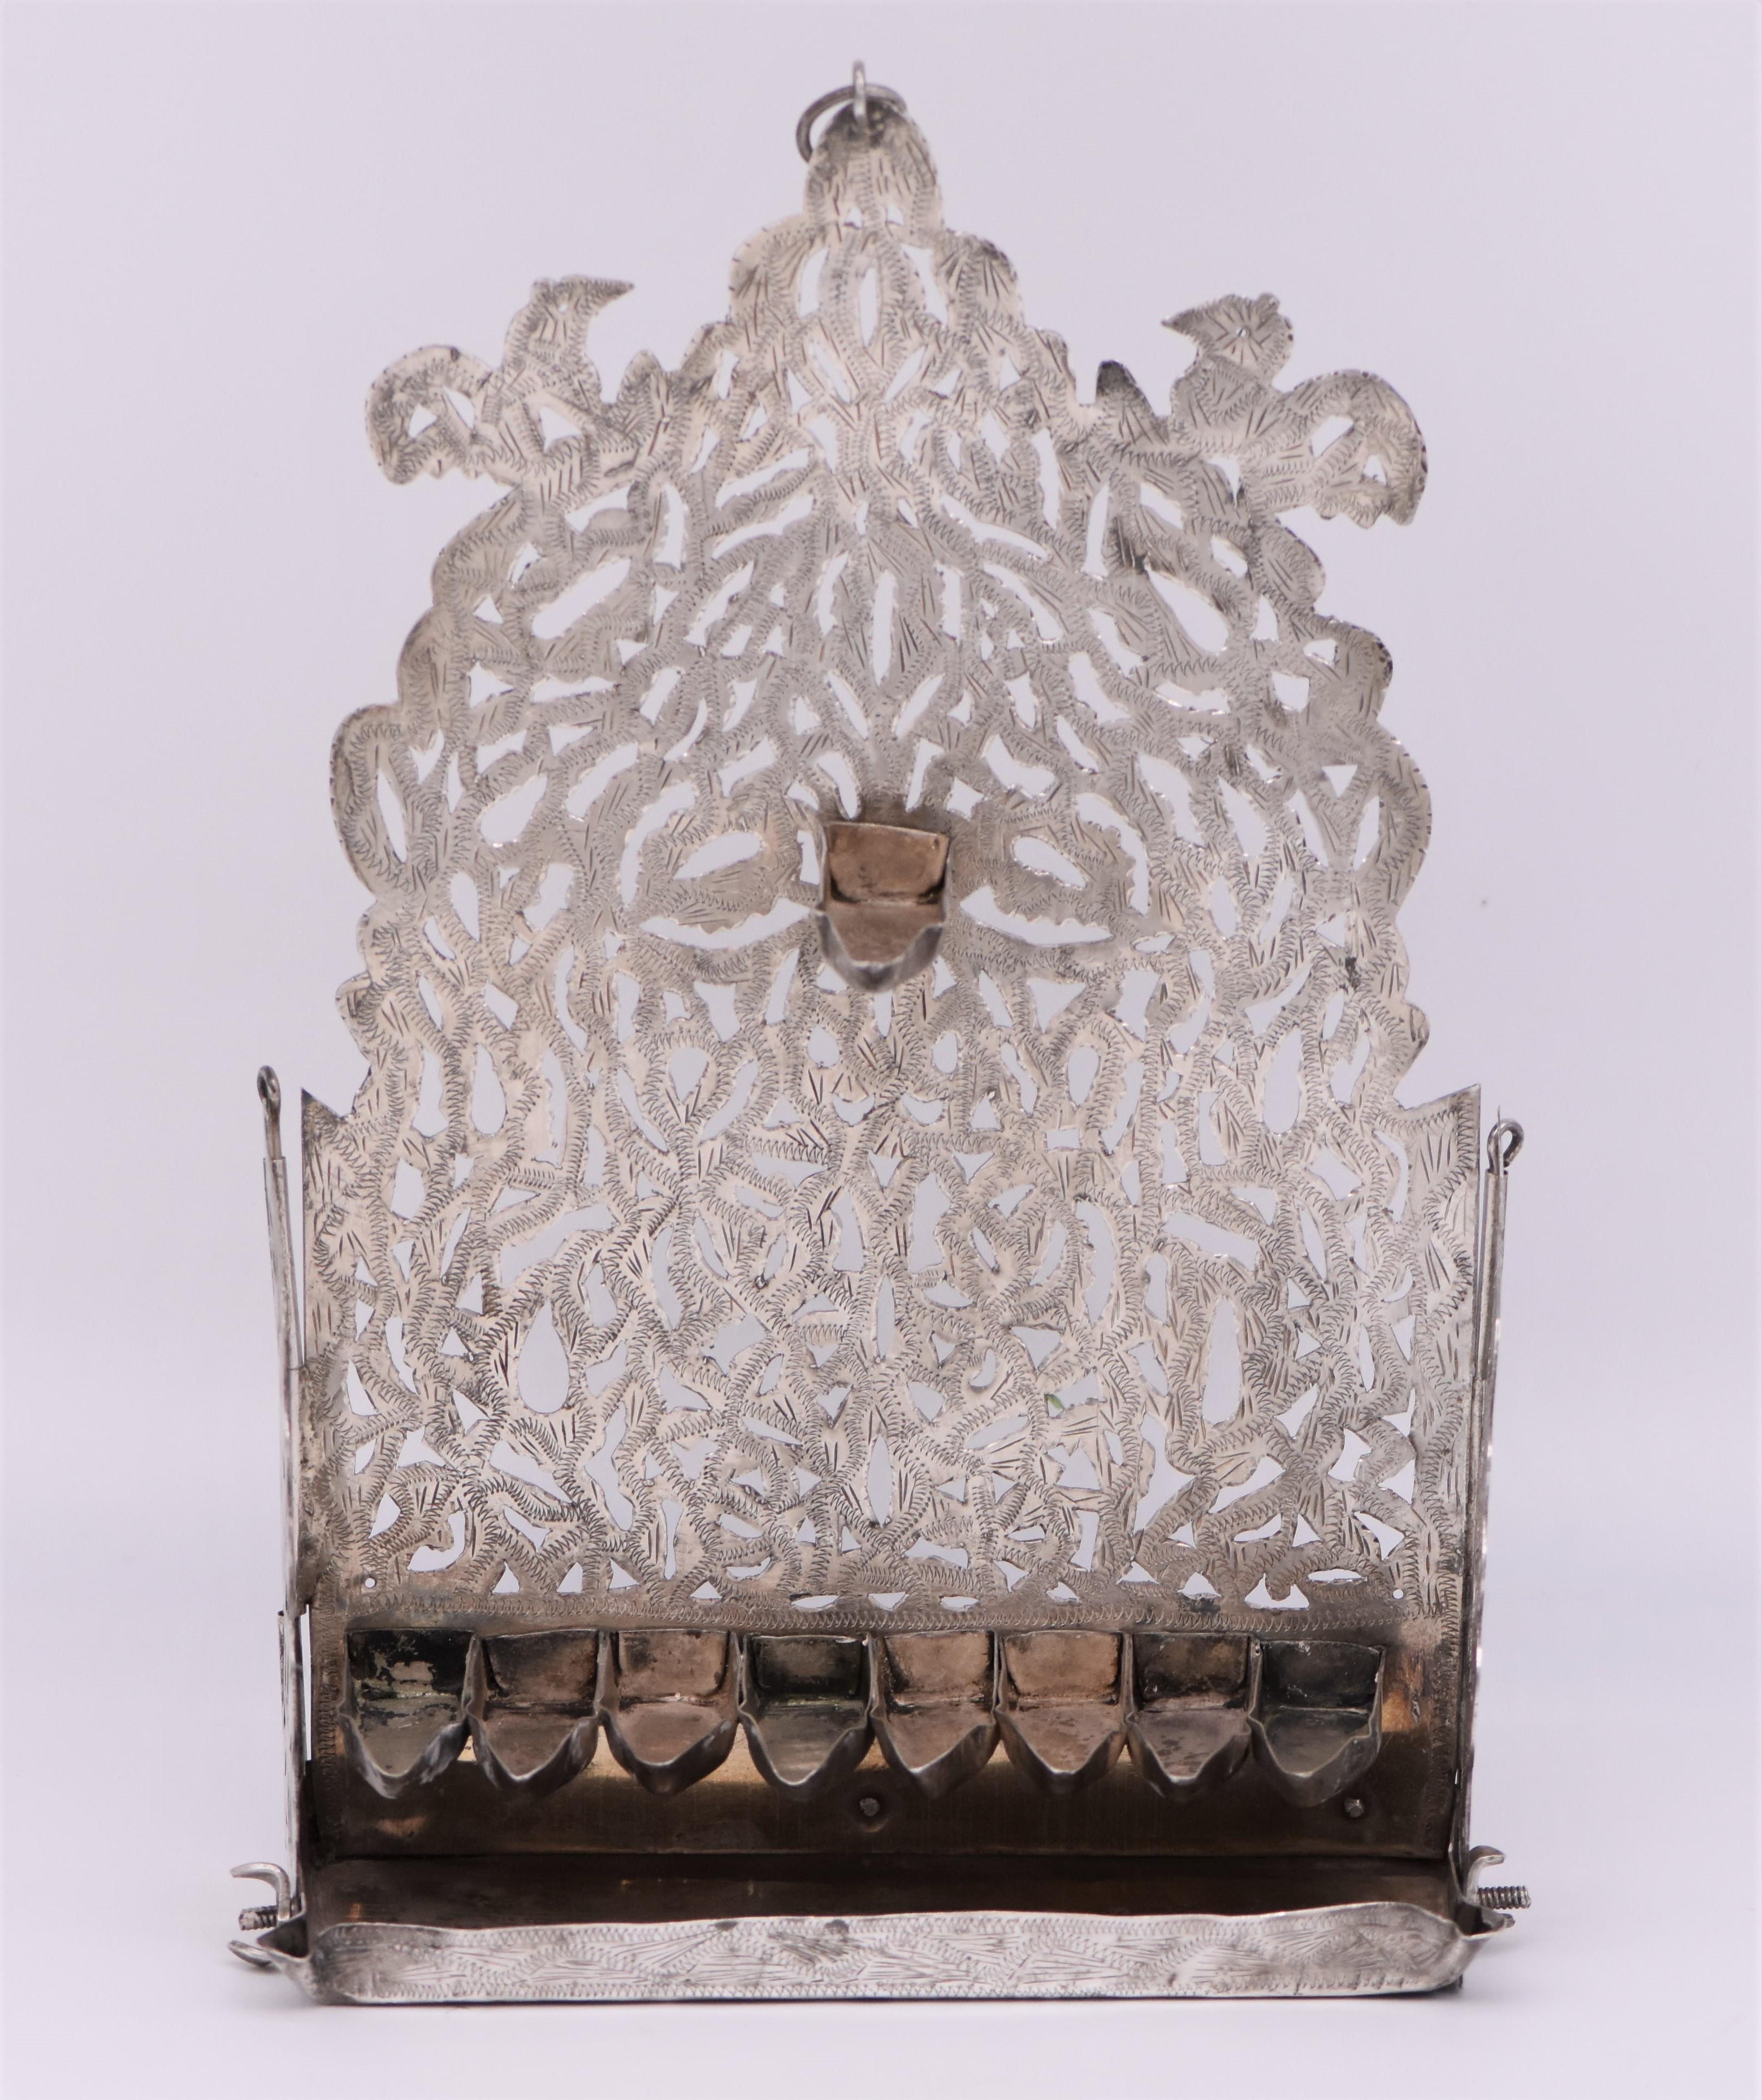 Silver Hanukkah lamp, Morocco, circa 1880. Cut and chased silver, stamped with Moroccan silver hallmarks. This beautiful hanging oil lamp is cutout with a decorated and engraved back plate. Two pillars on the sides with flanking roosters and two